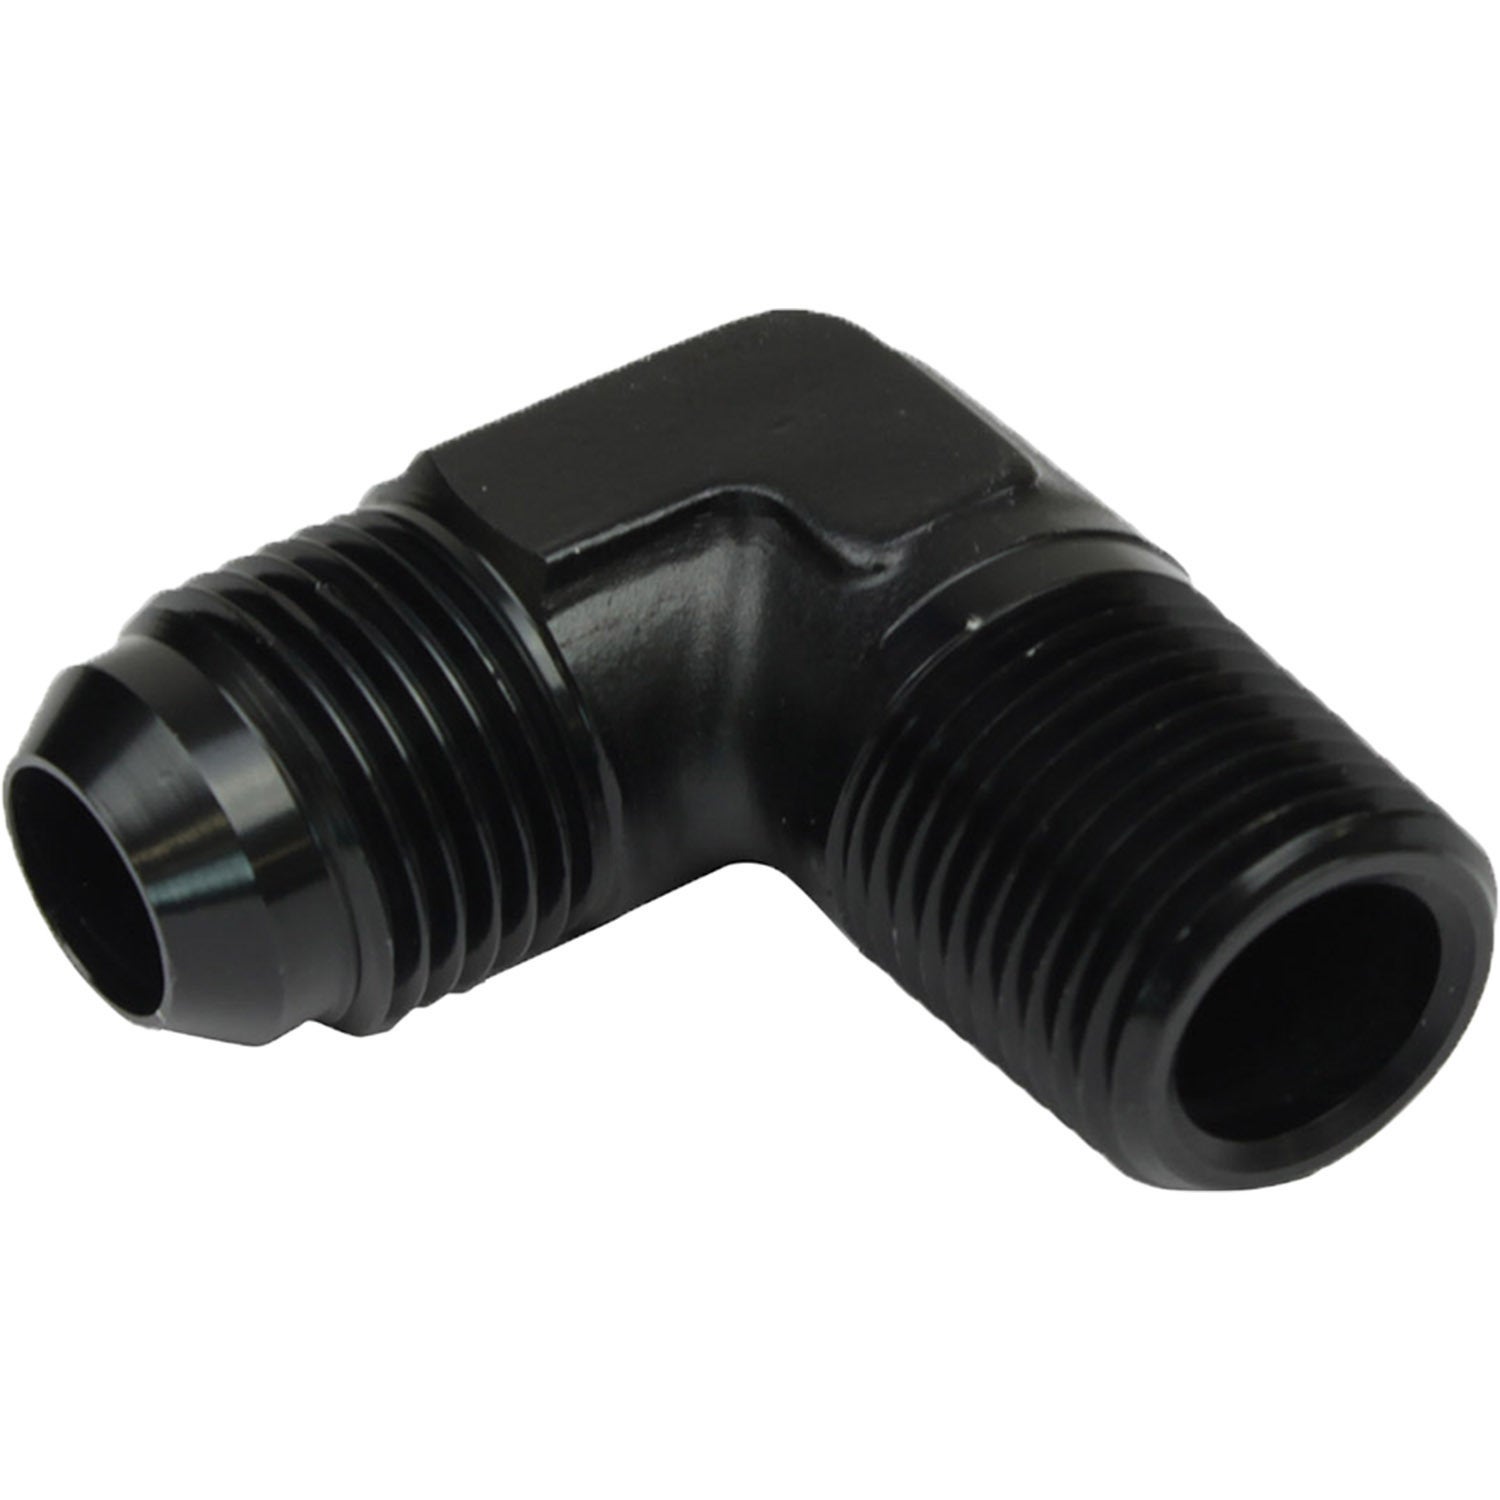 Proflow Male Adaptor -10AN To 1/2in. NPT 90 Degree Black